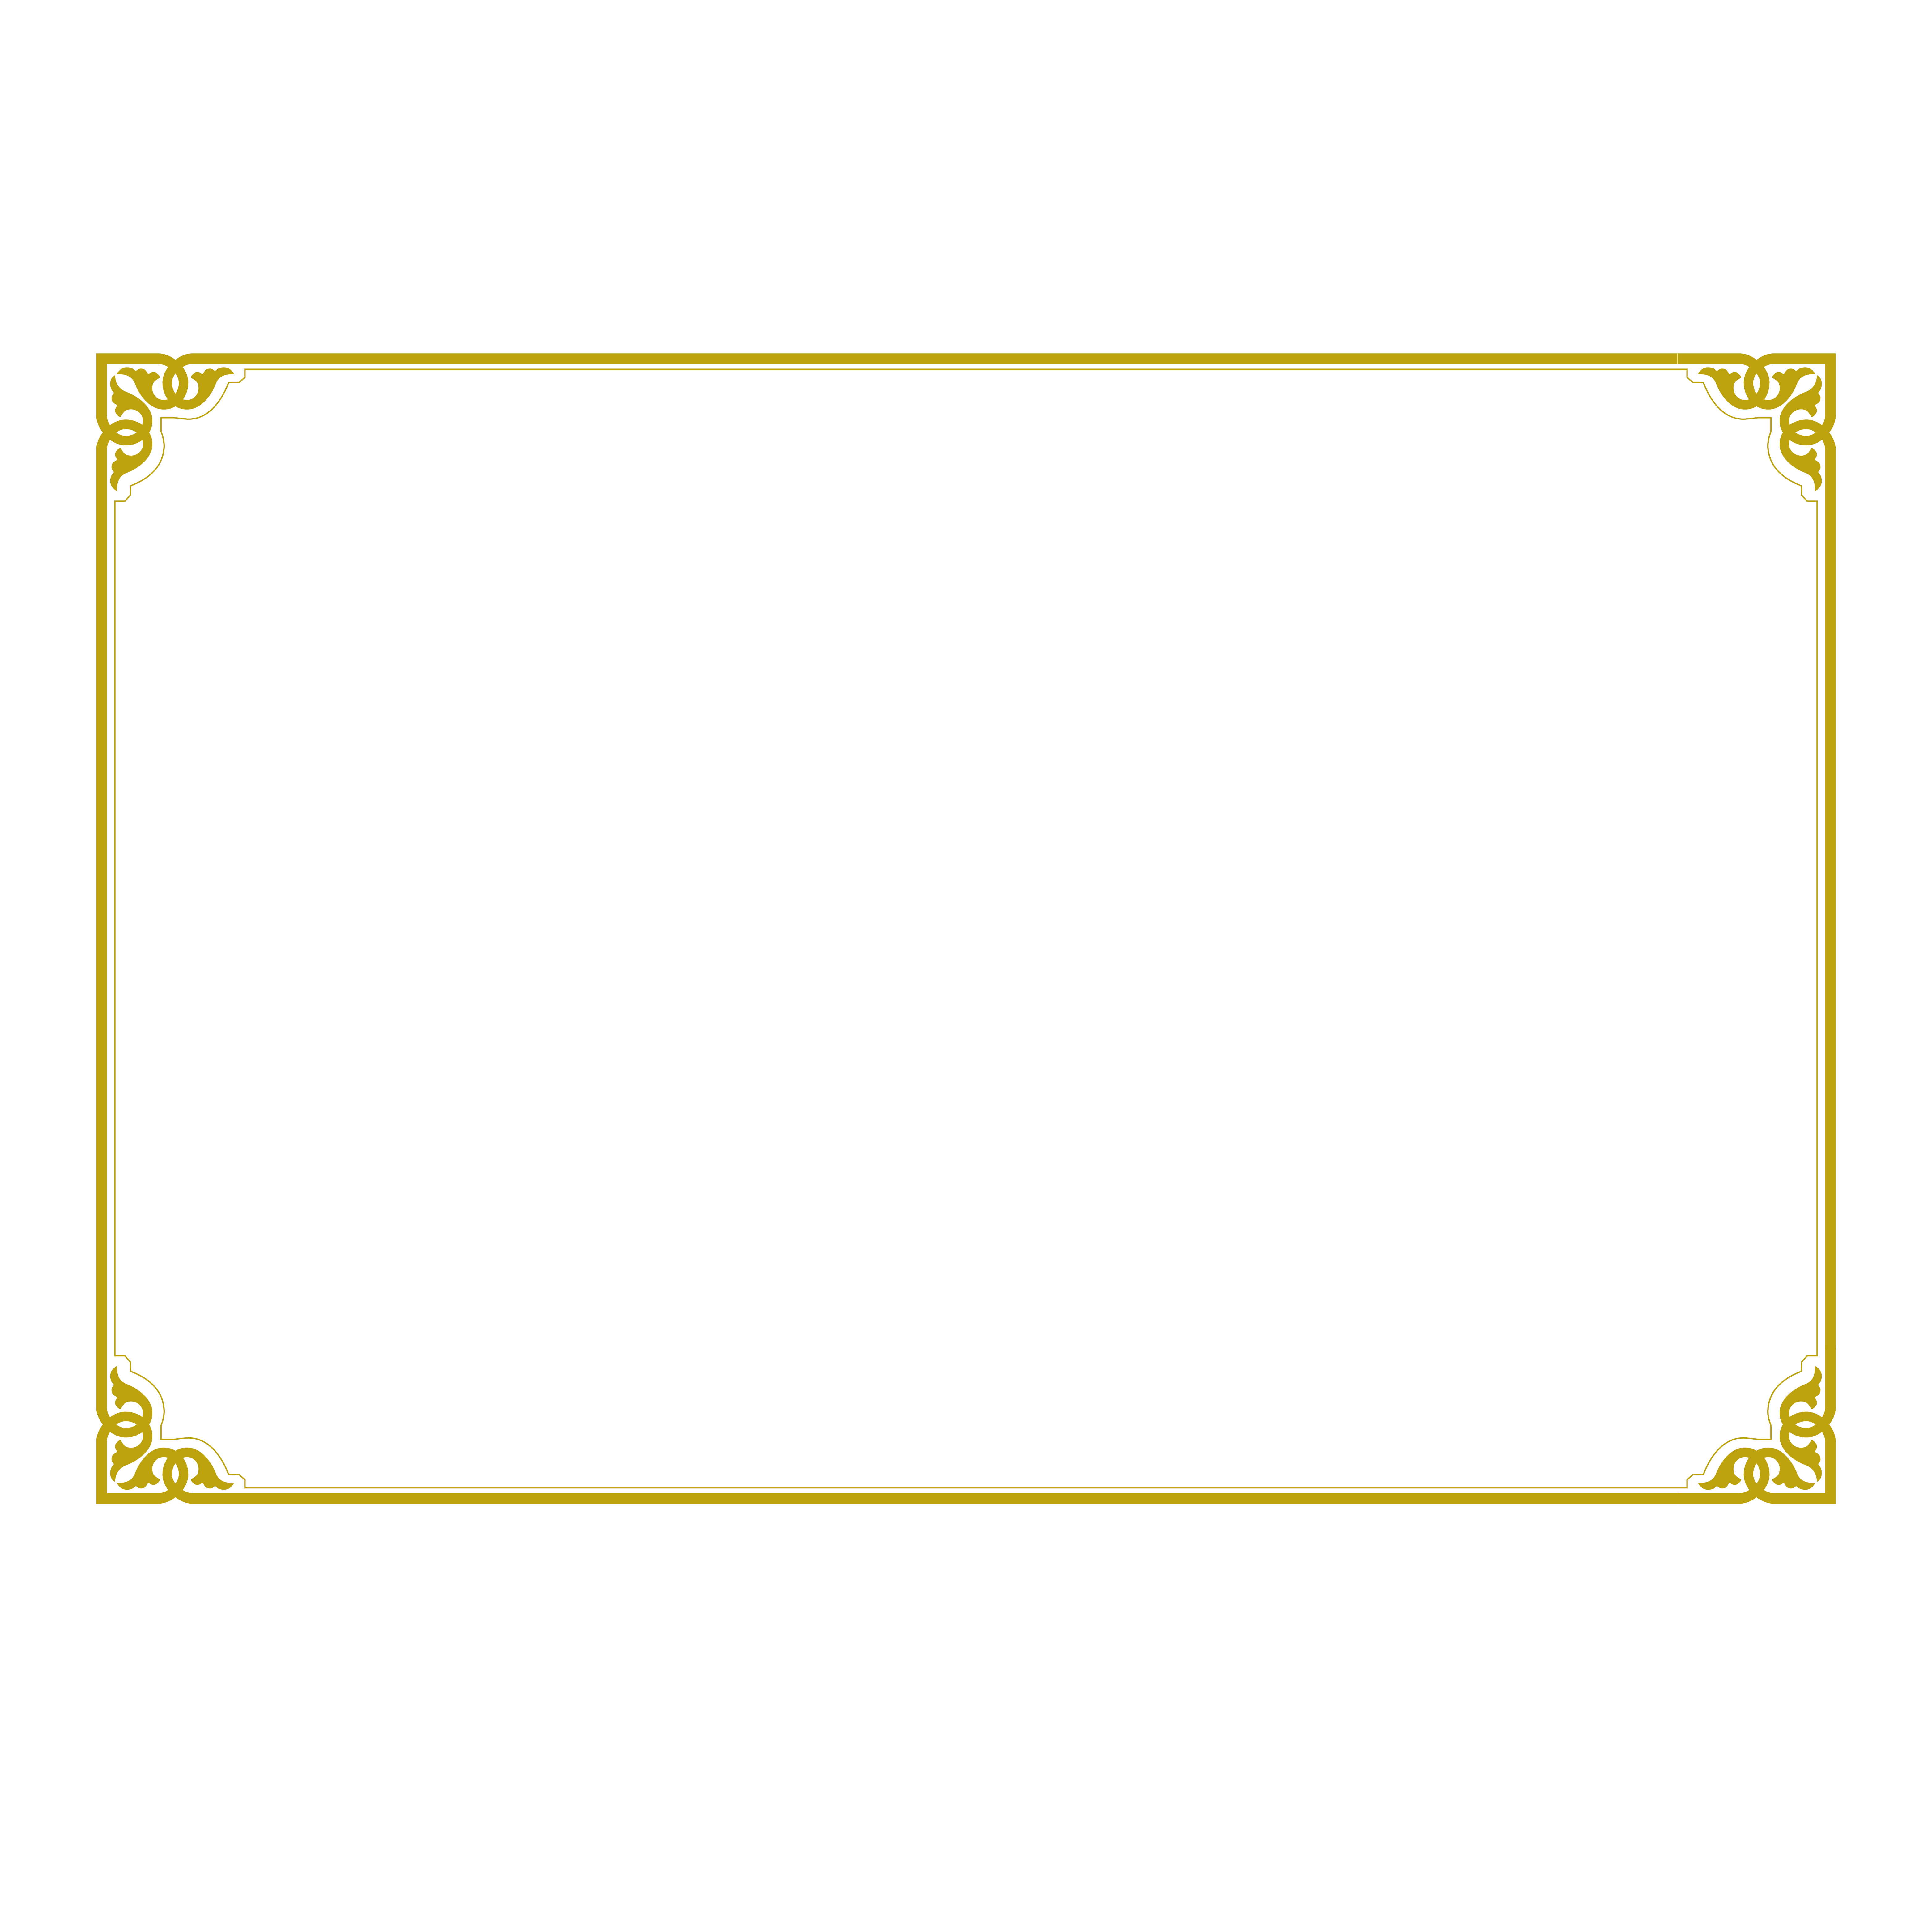 Vector free best of. Certificate border png